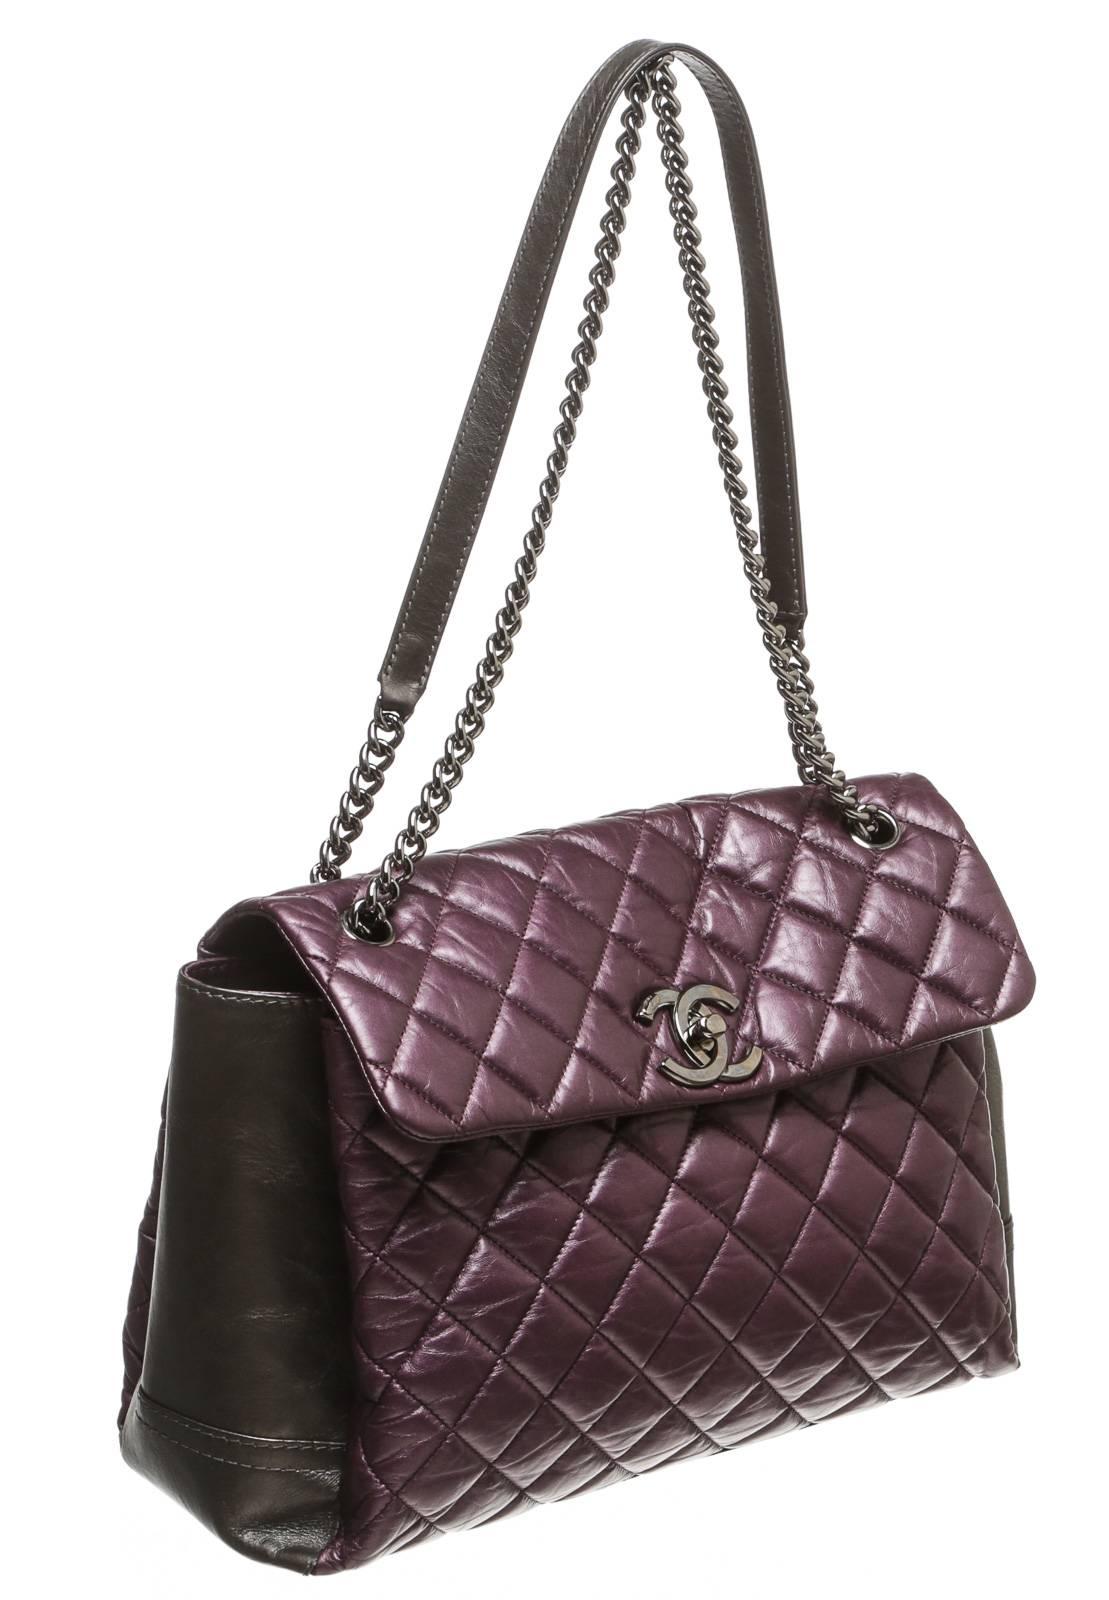 Chanel Purple and Gray Lambskin Lady Pearly Flap Handbag In Excellent Condition For Sale In Corona Del Mar, CA